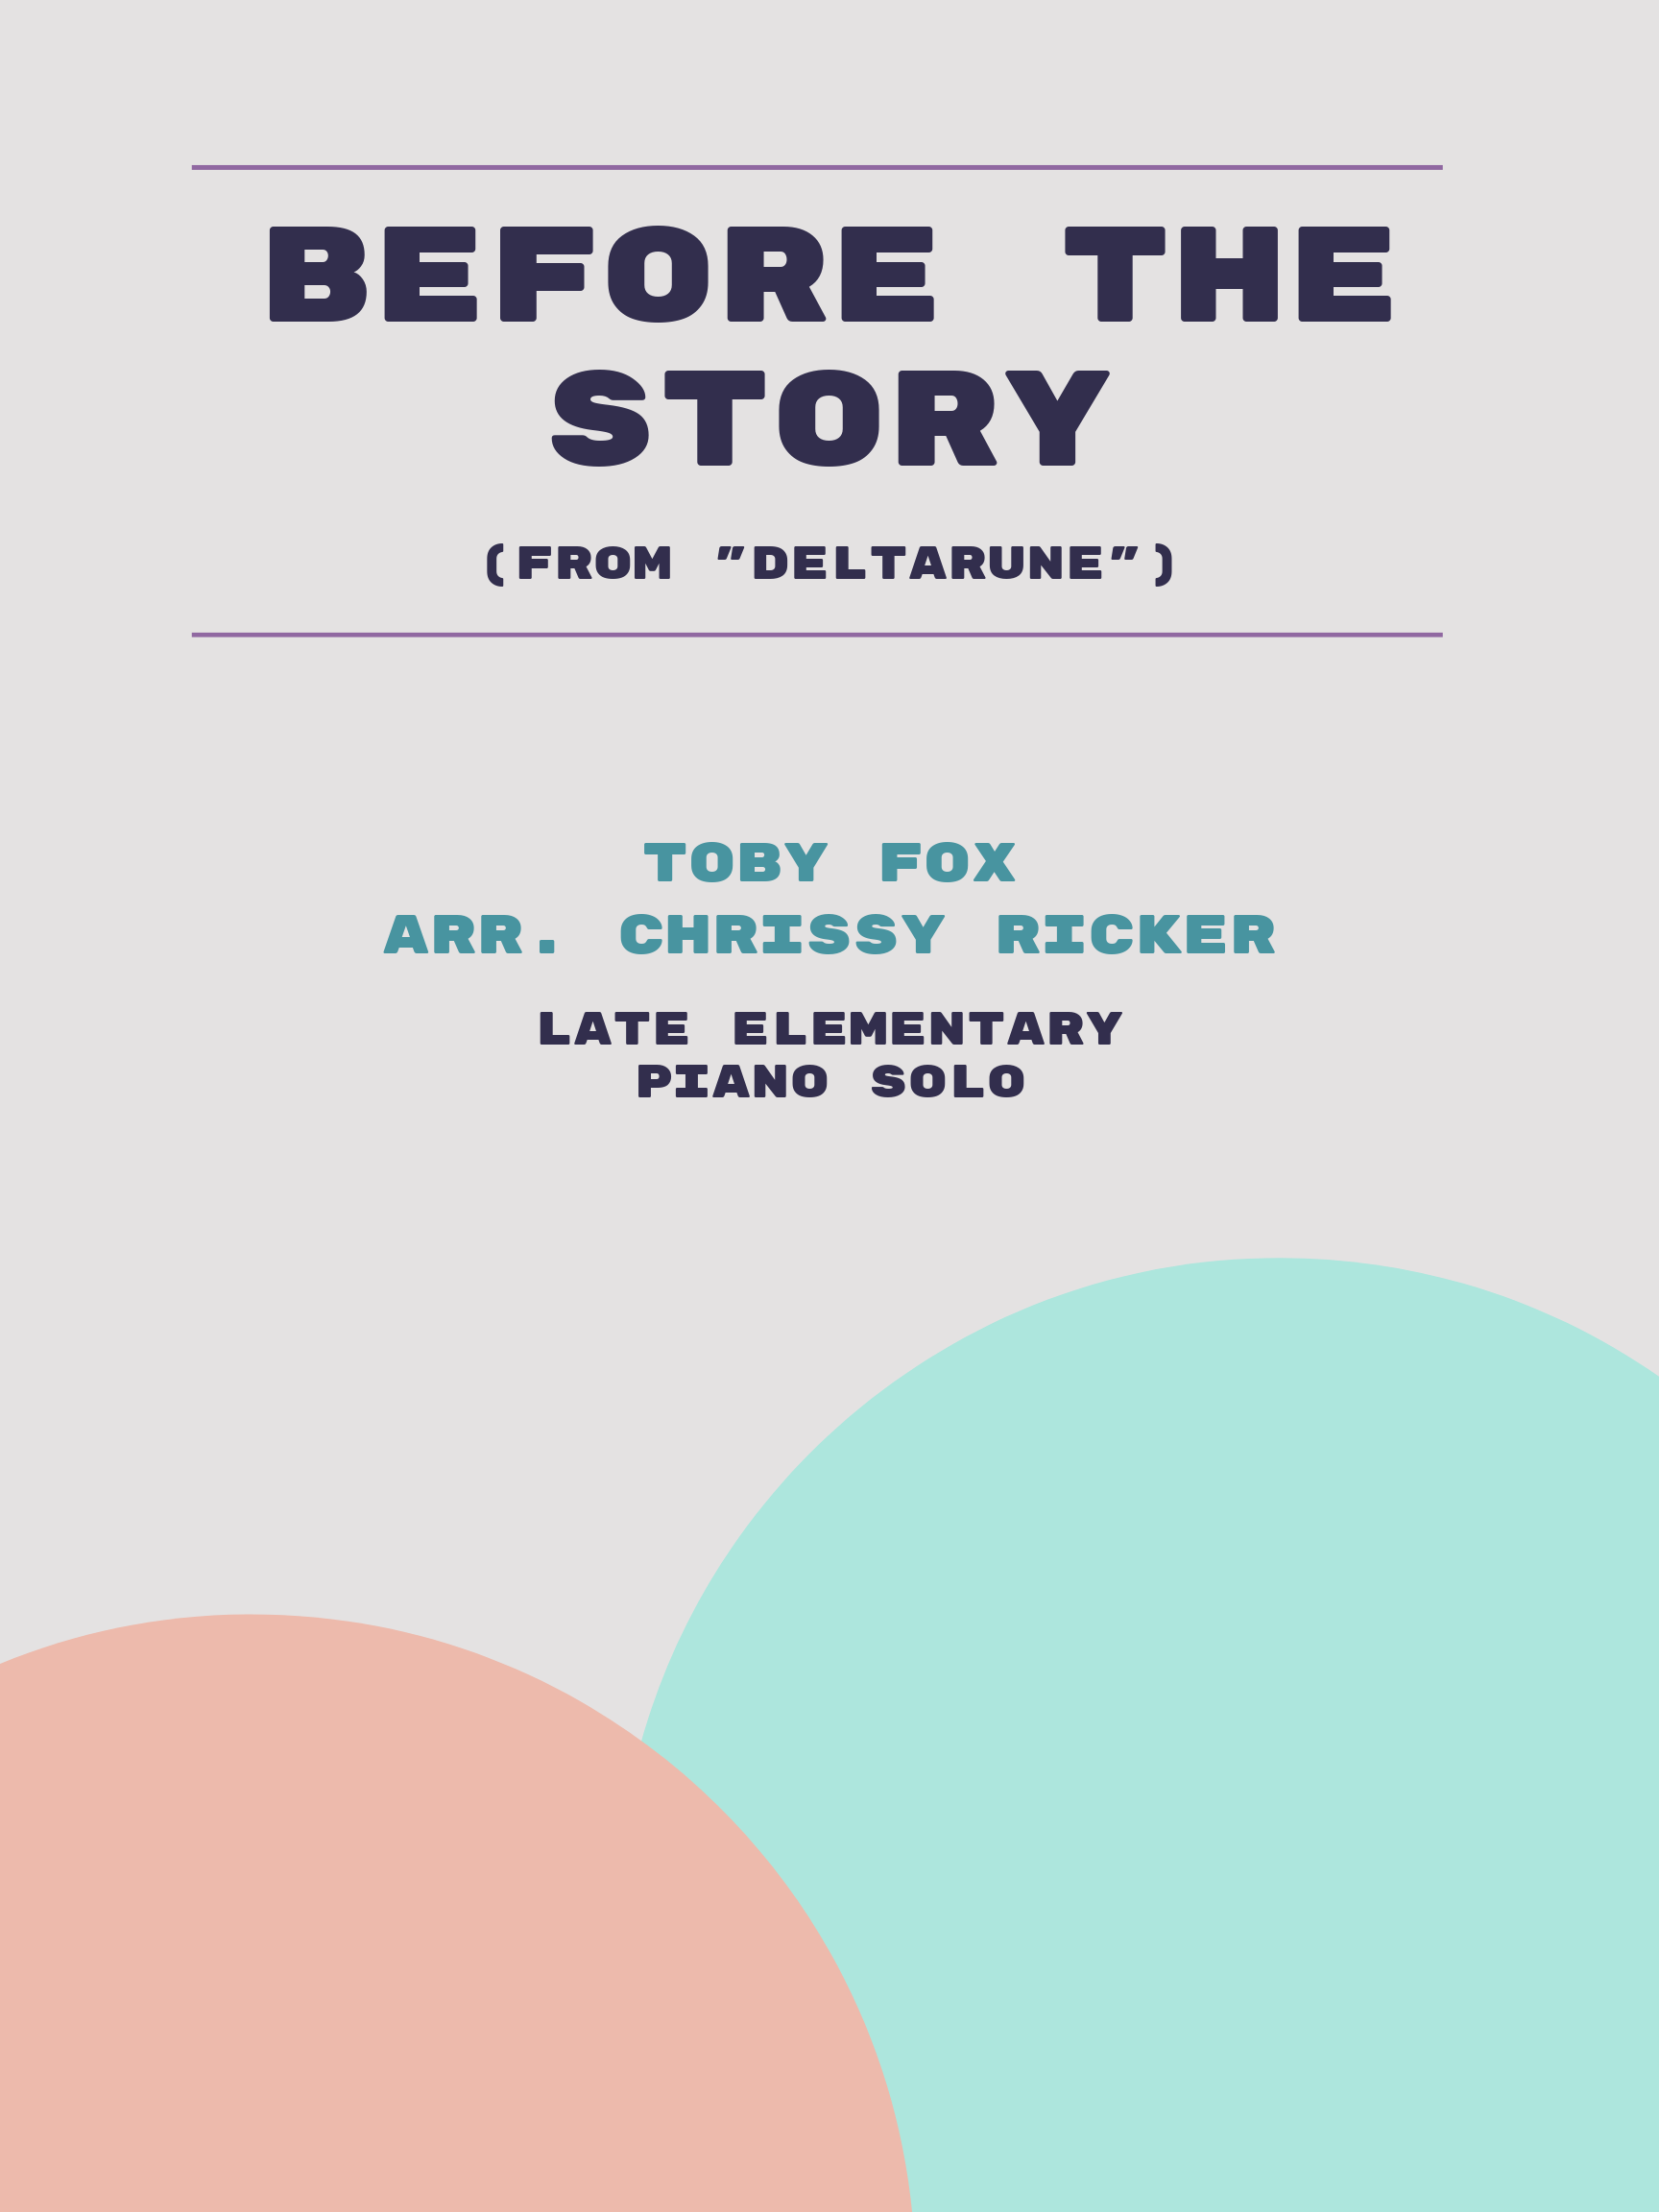 Before the Story by Toby Fox